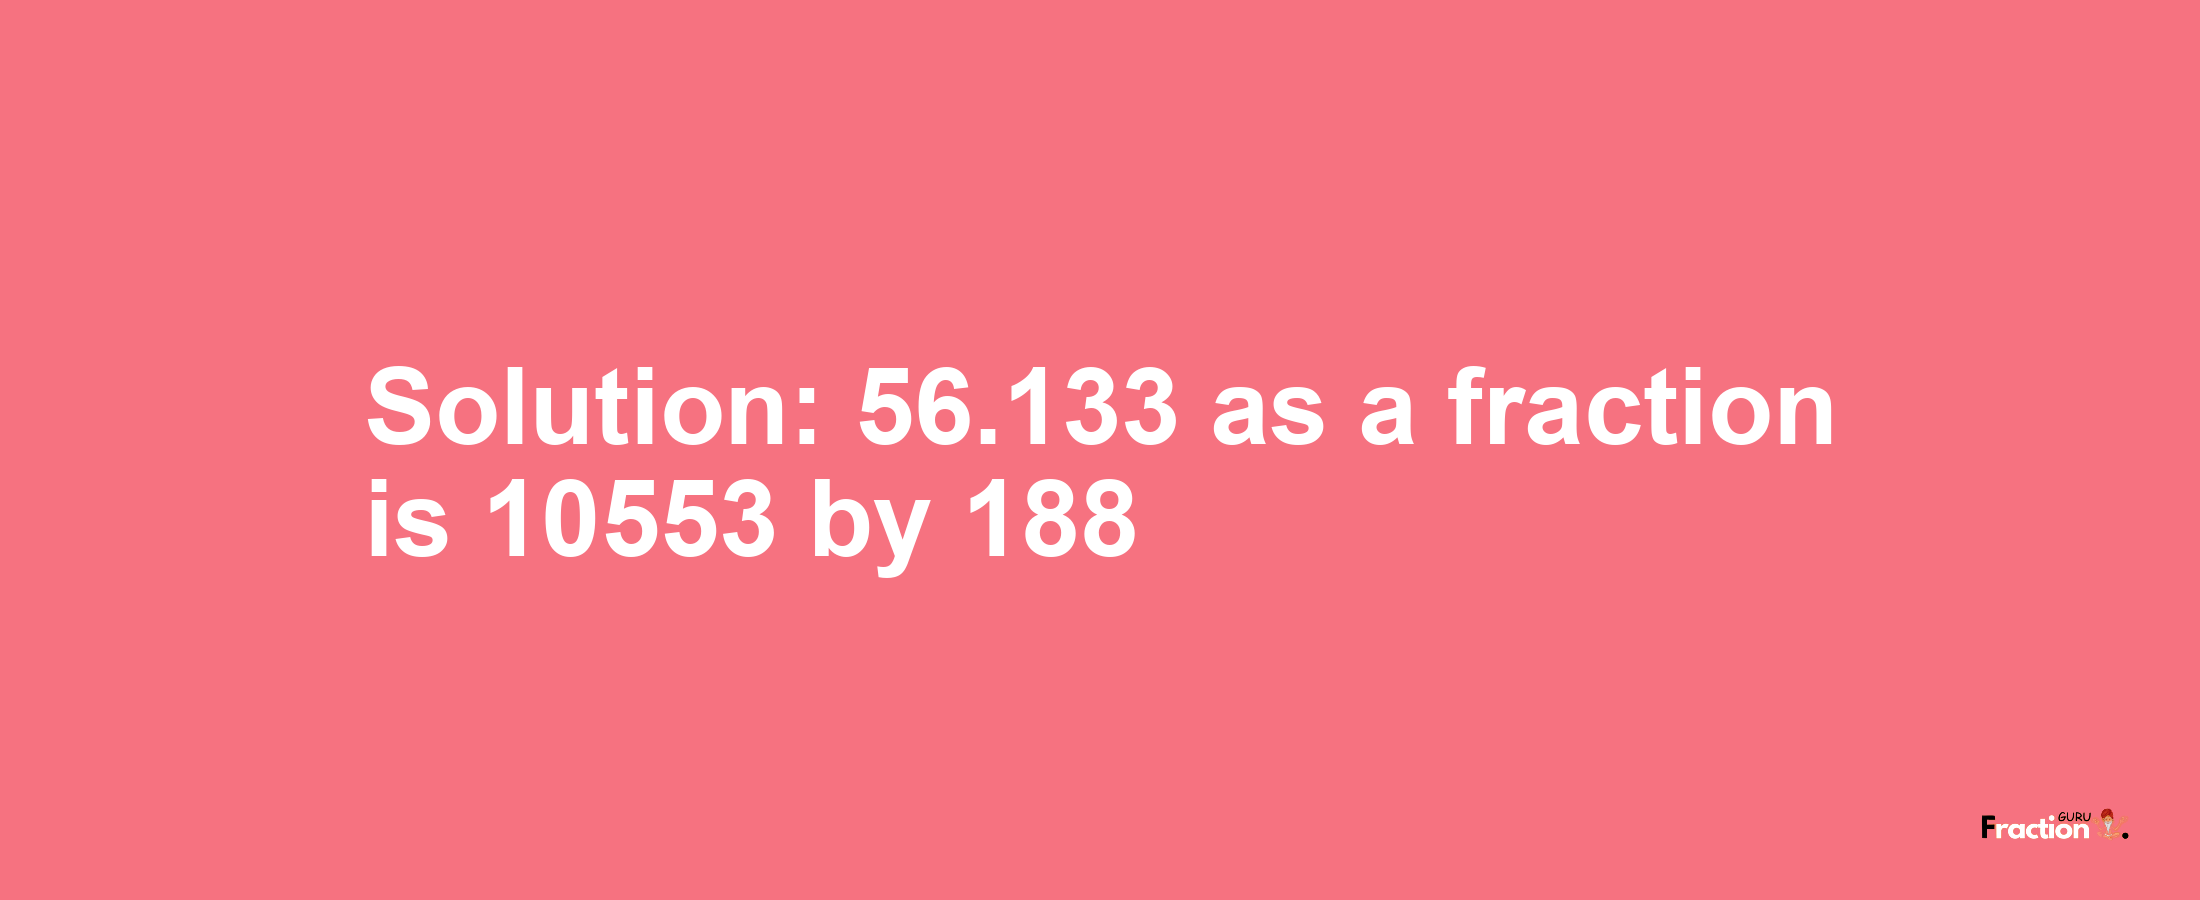 Solution:56.133 as a fraction is 10553/188